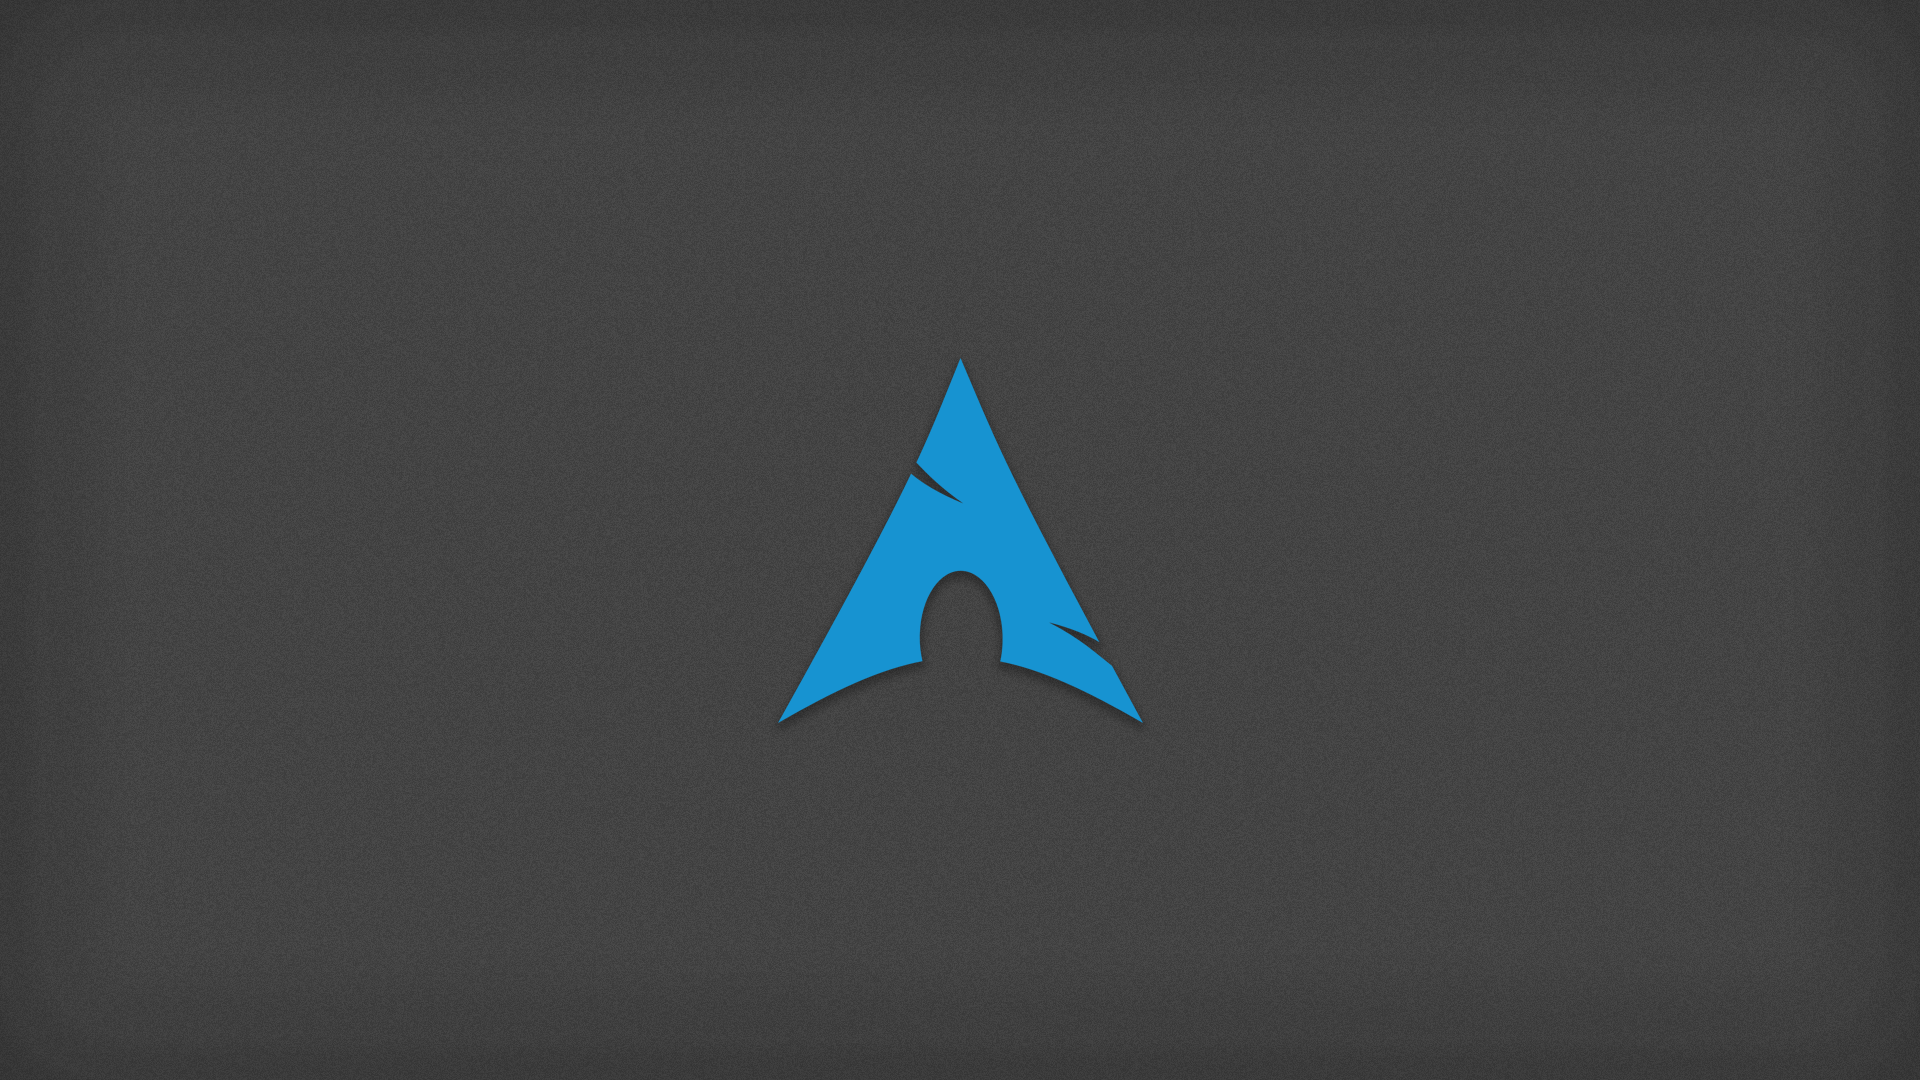 General 1920x1080 triangle Arch Linux minimalism simple background Linux operating system